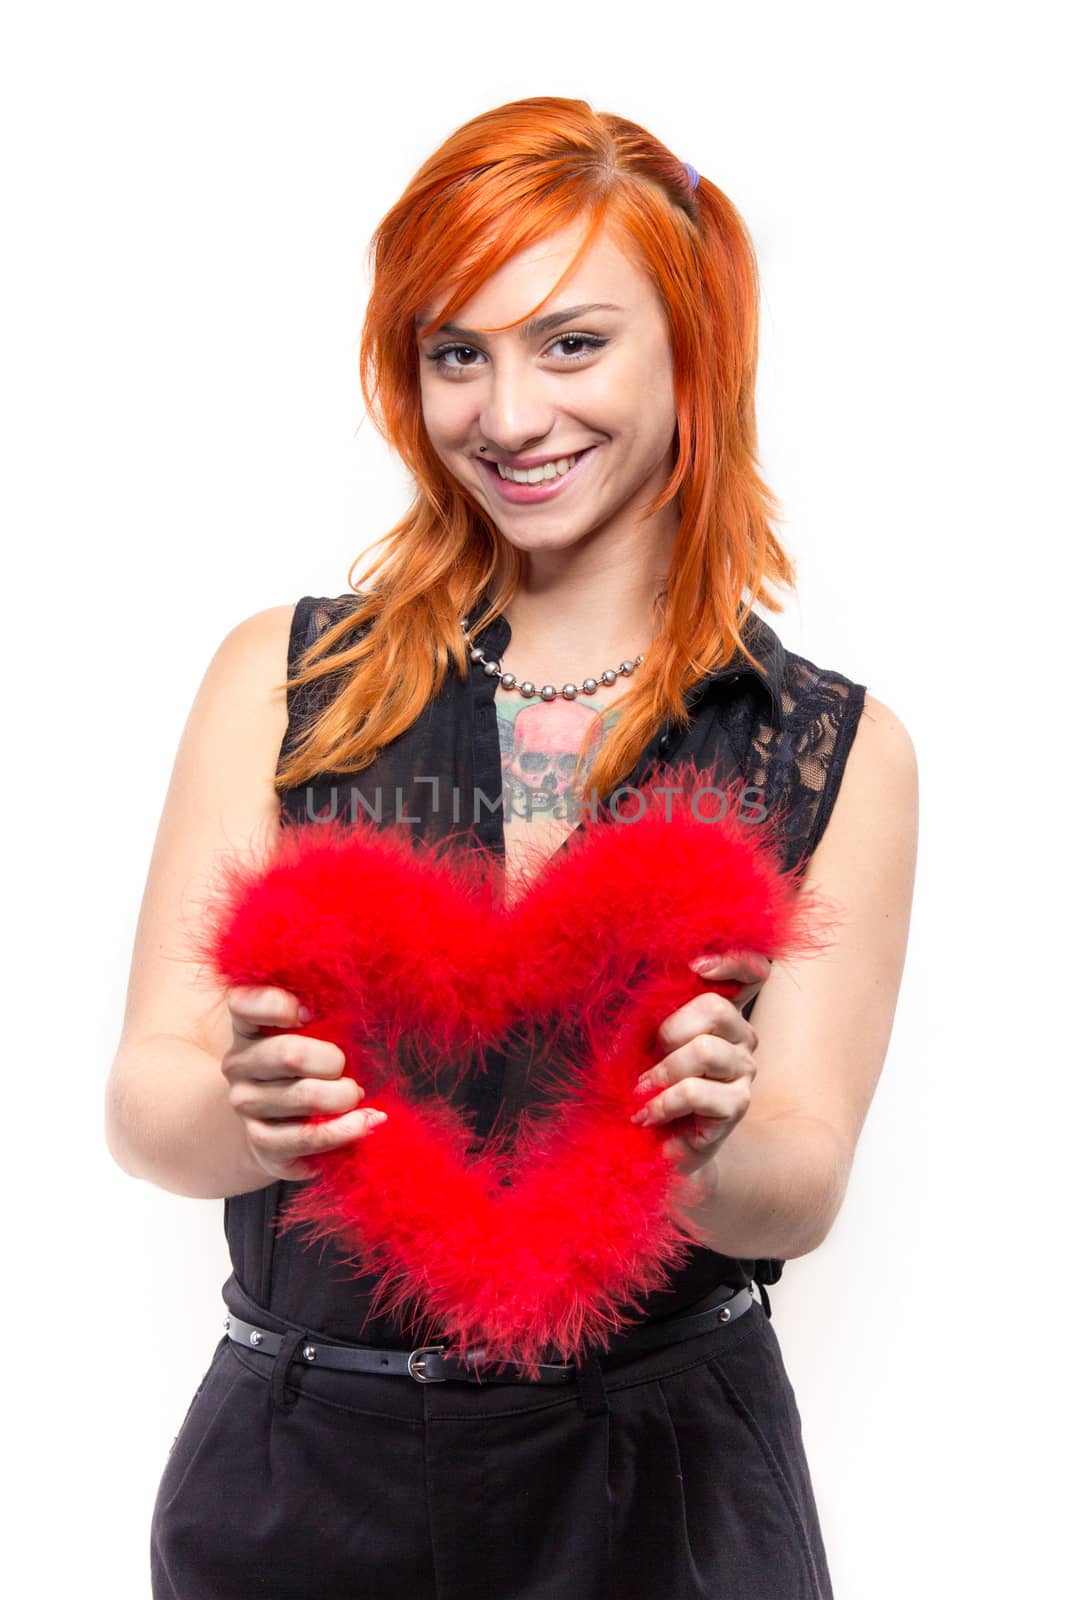 Smiling pretty girl holding a heart made of bird feathers